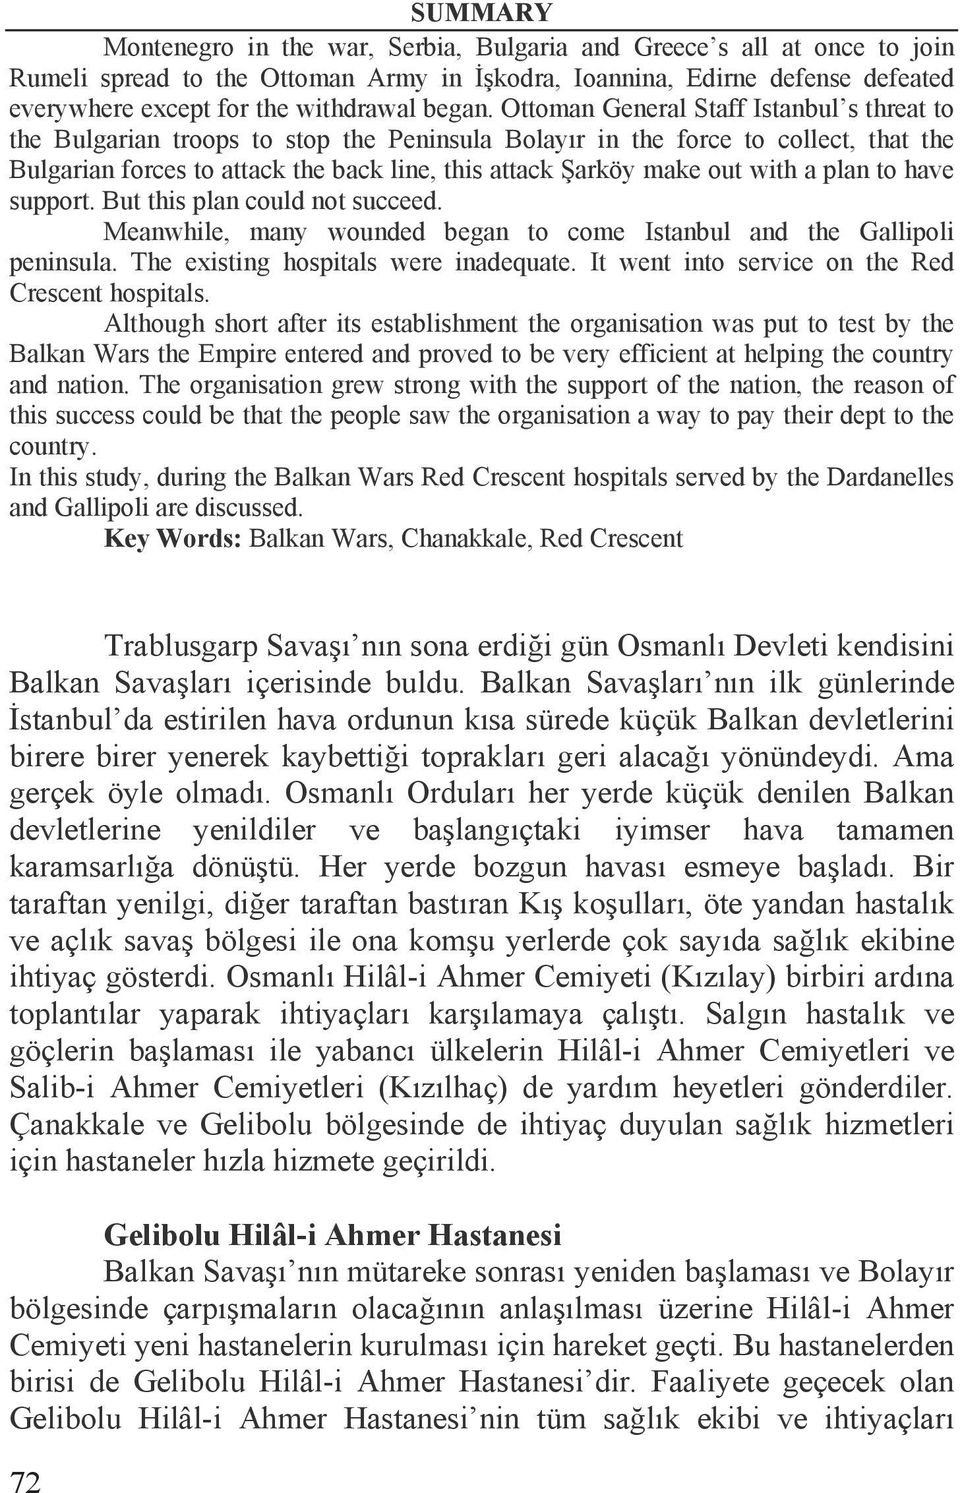 Ottoman General Staff Istanbul s threat to the Bulgarian troops to stop the Peninsula Bolayõr in the force to collect, that the Bulgarian forces to attack the back line, this attack arköy make out